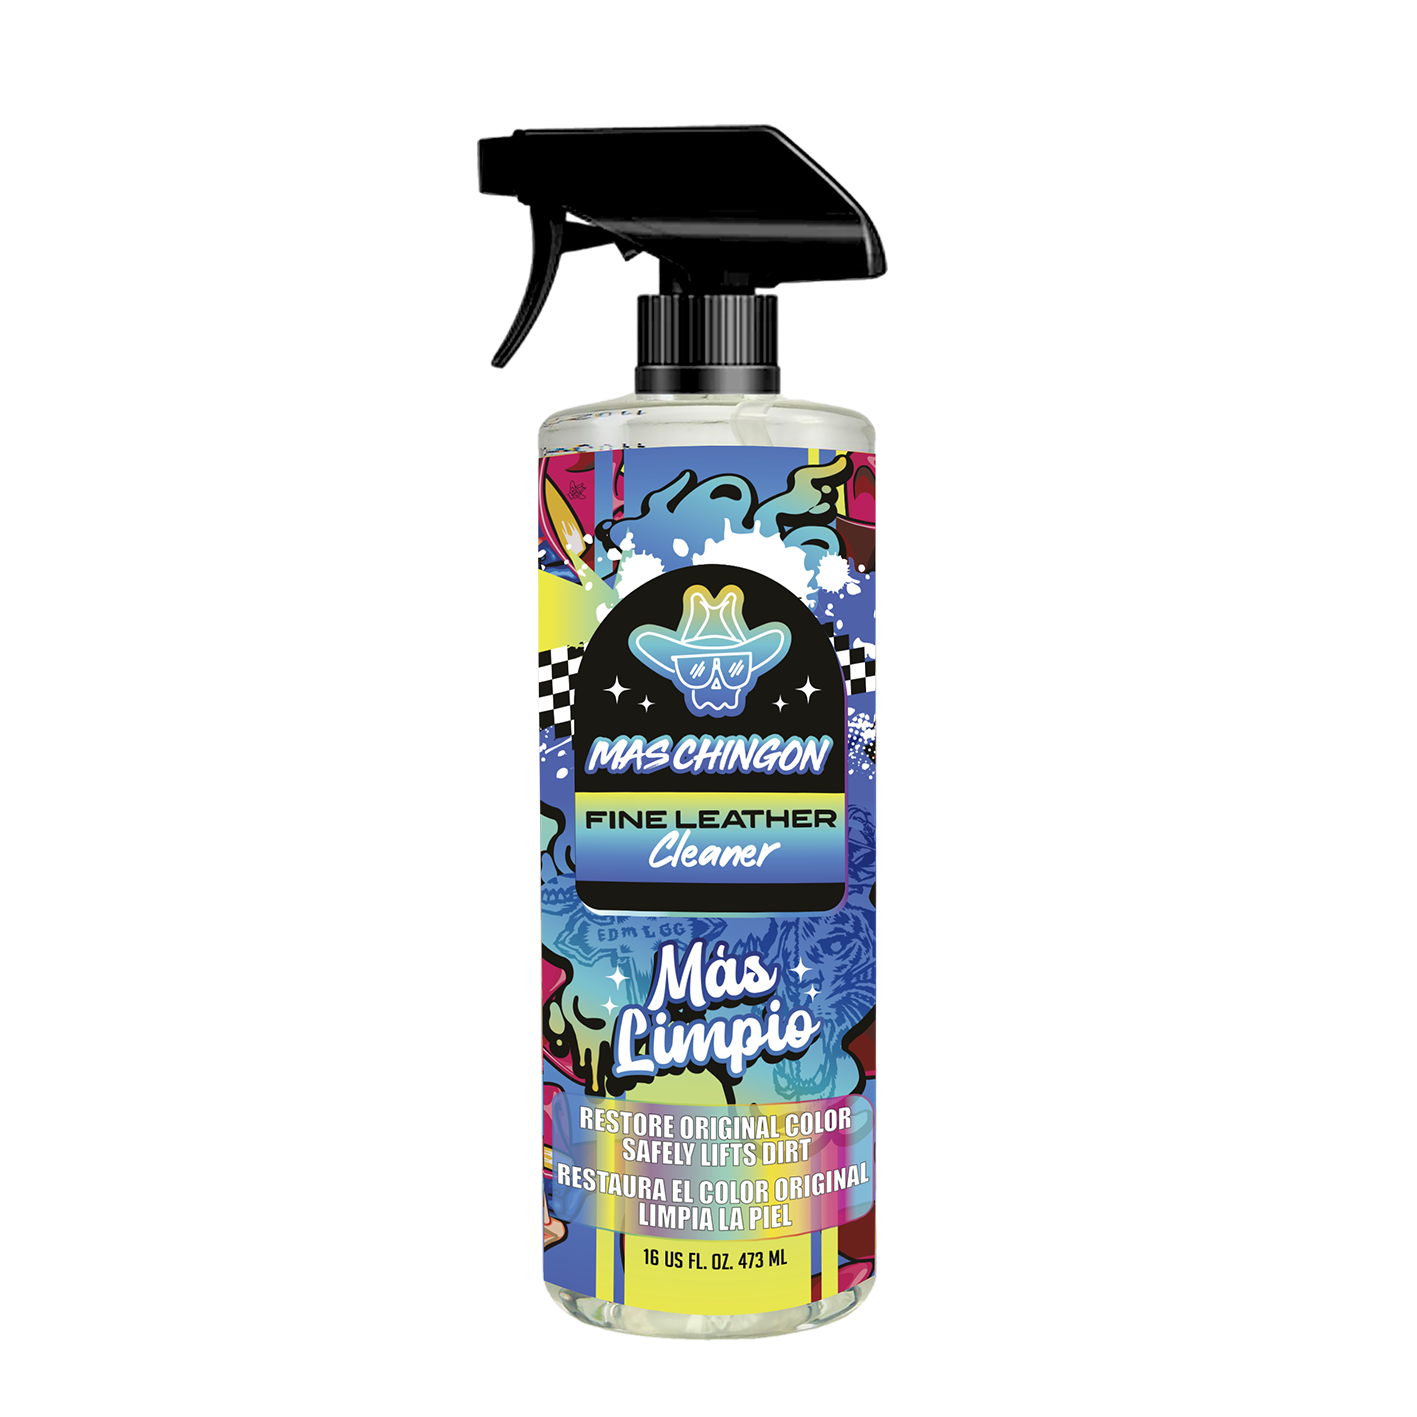 Mas Chingon Fine Leather Cleaner